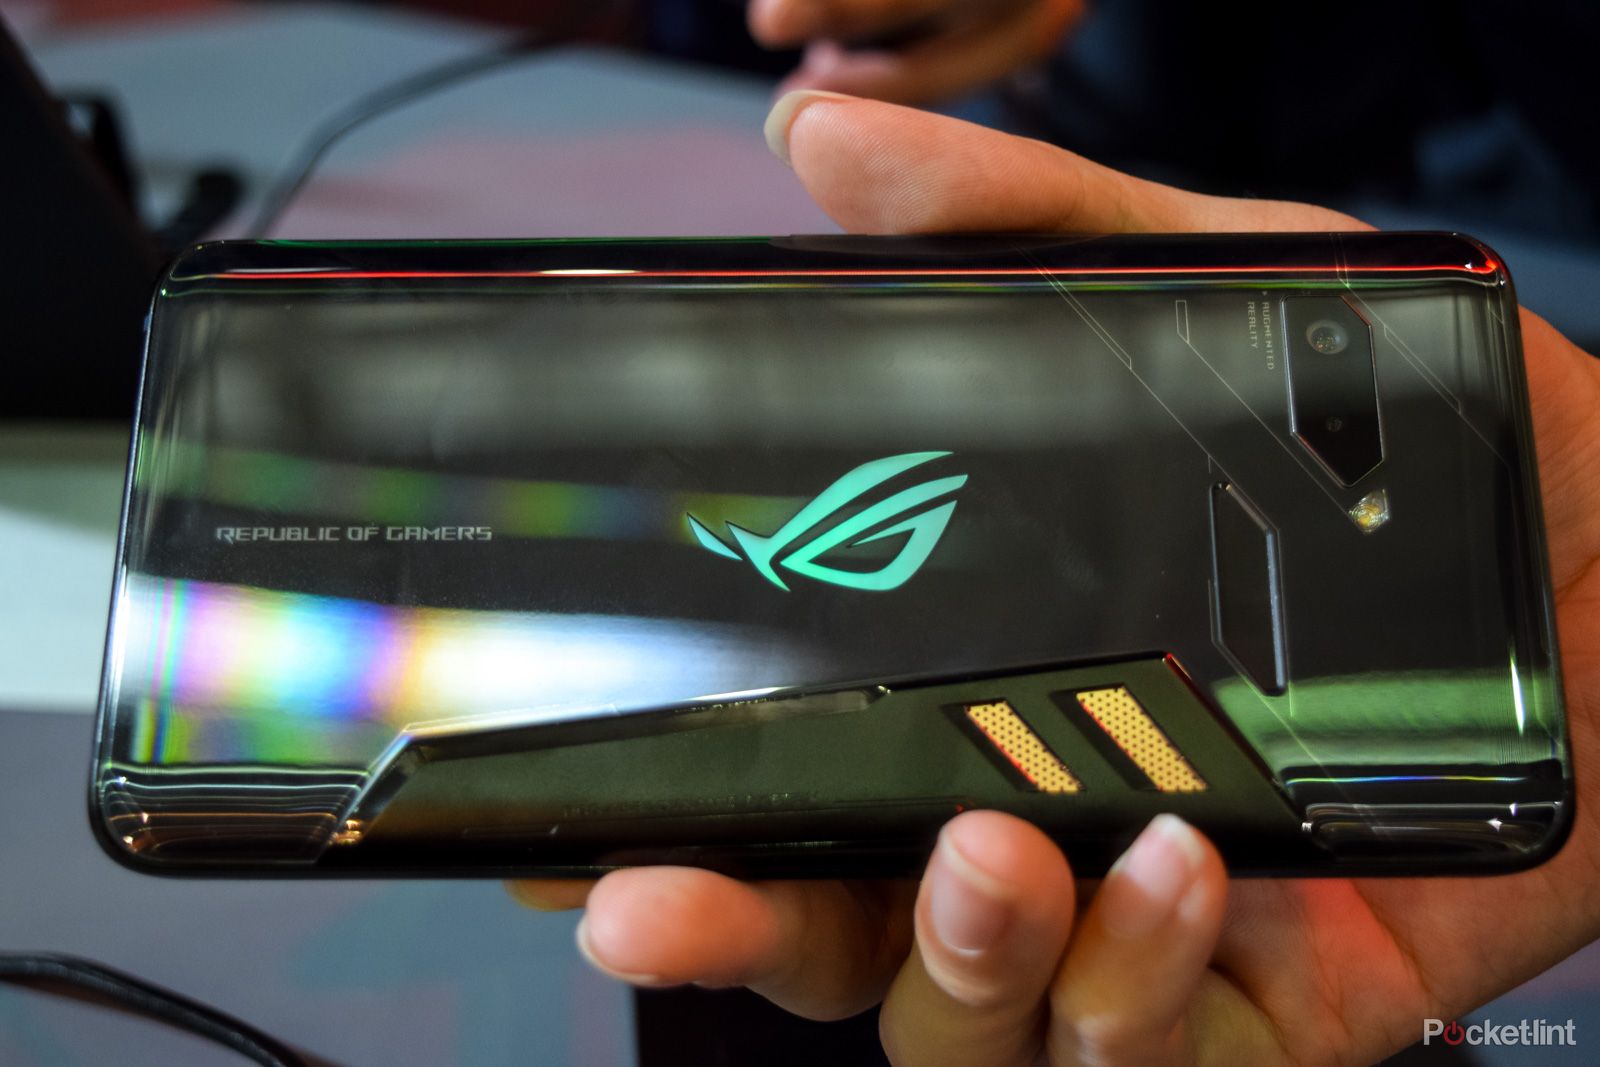 Asus Rog Phone Initial Review The Serious Flagship Smartphone For Pubg Gamers And More image 5